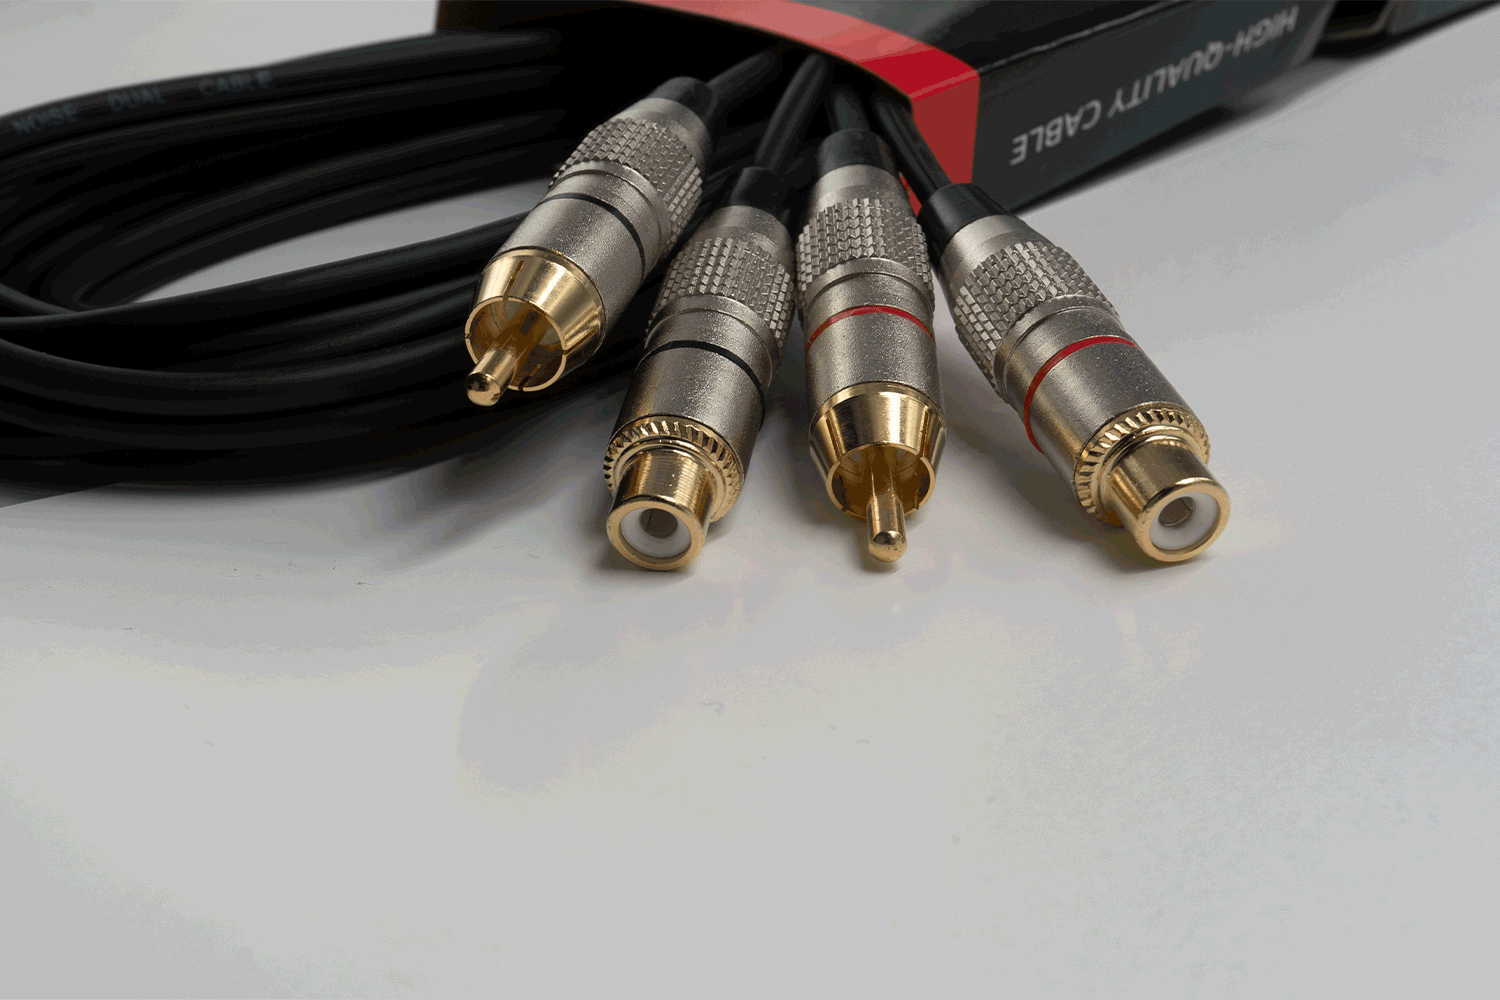 2RCA2RCAF5EL - 5m 2x RCA Male to Female Signal Lead - Red and Black Ring